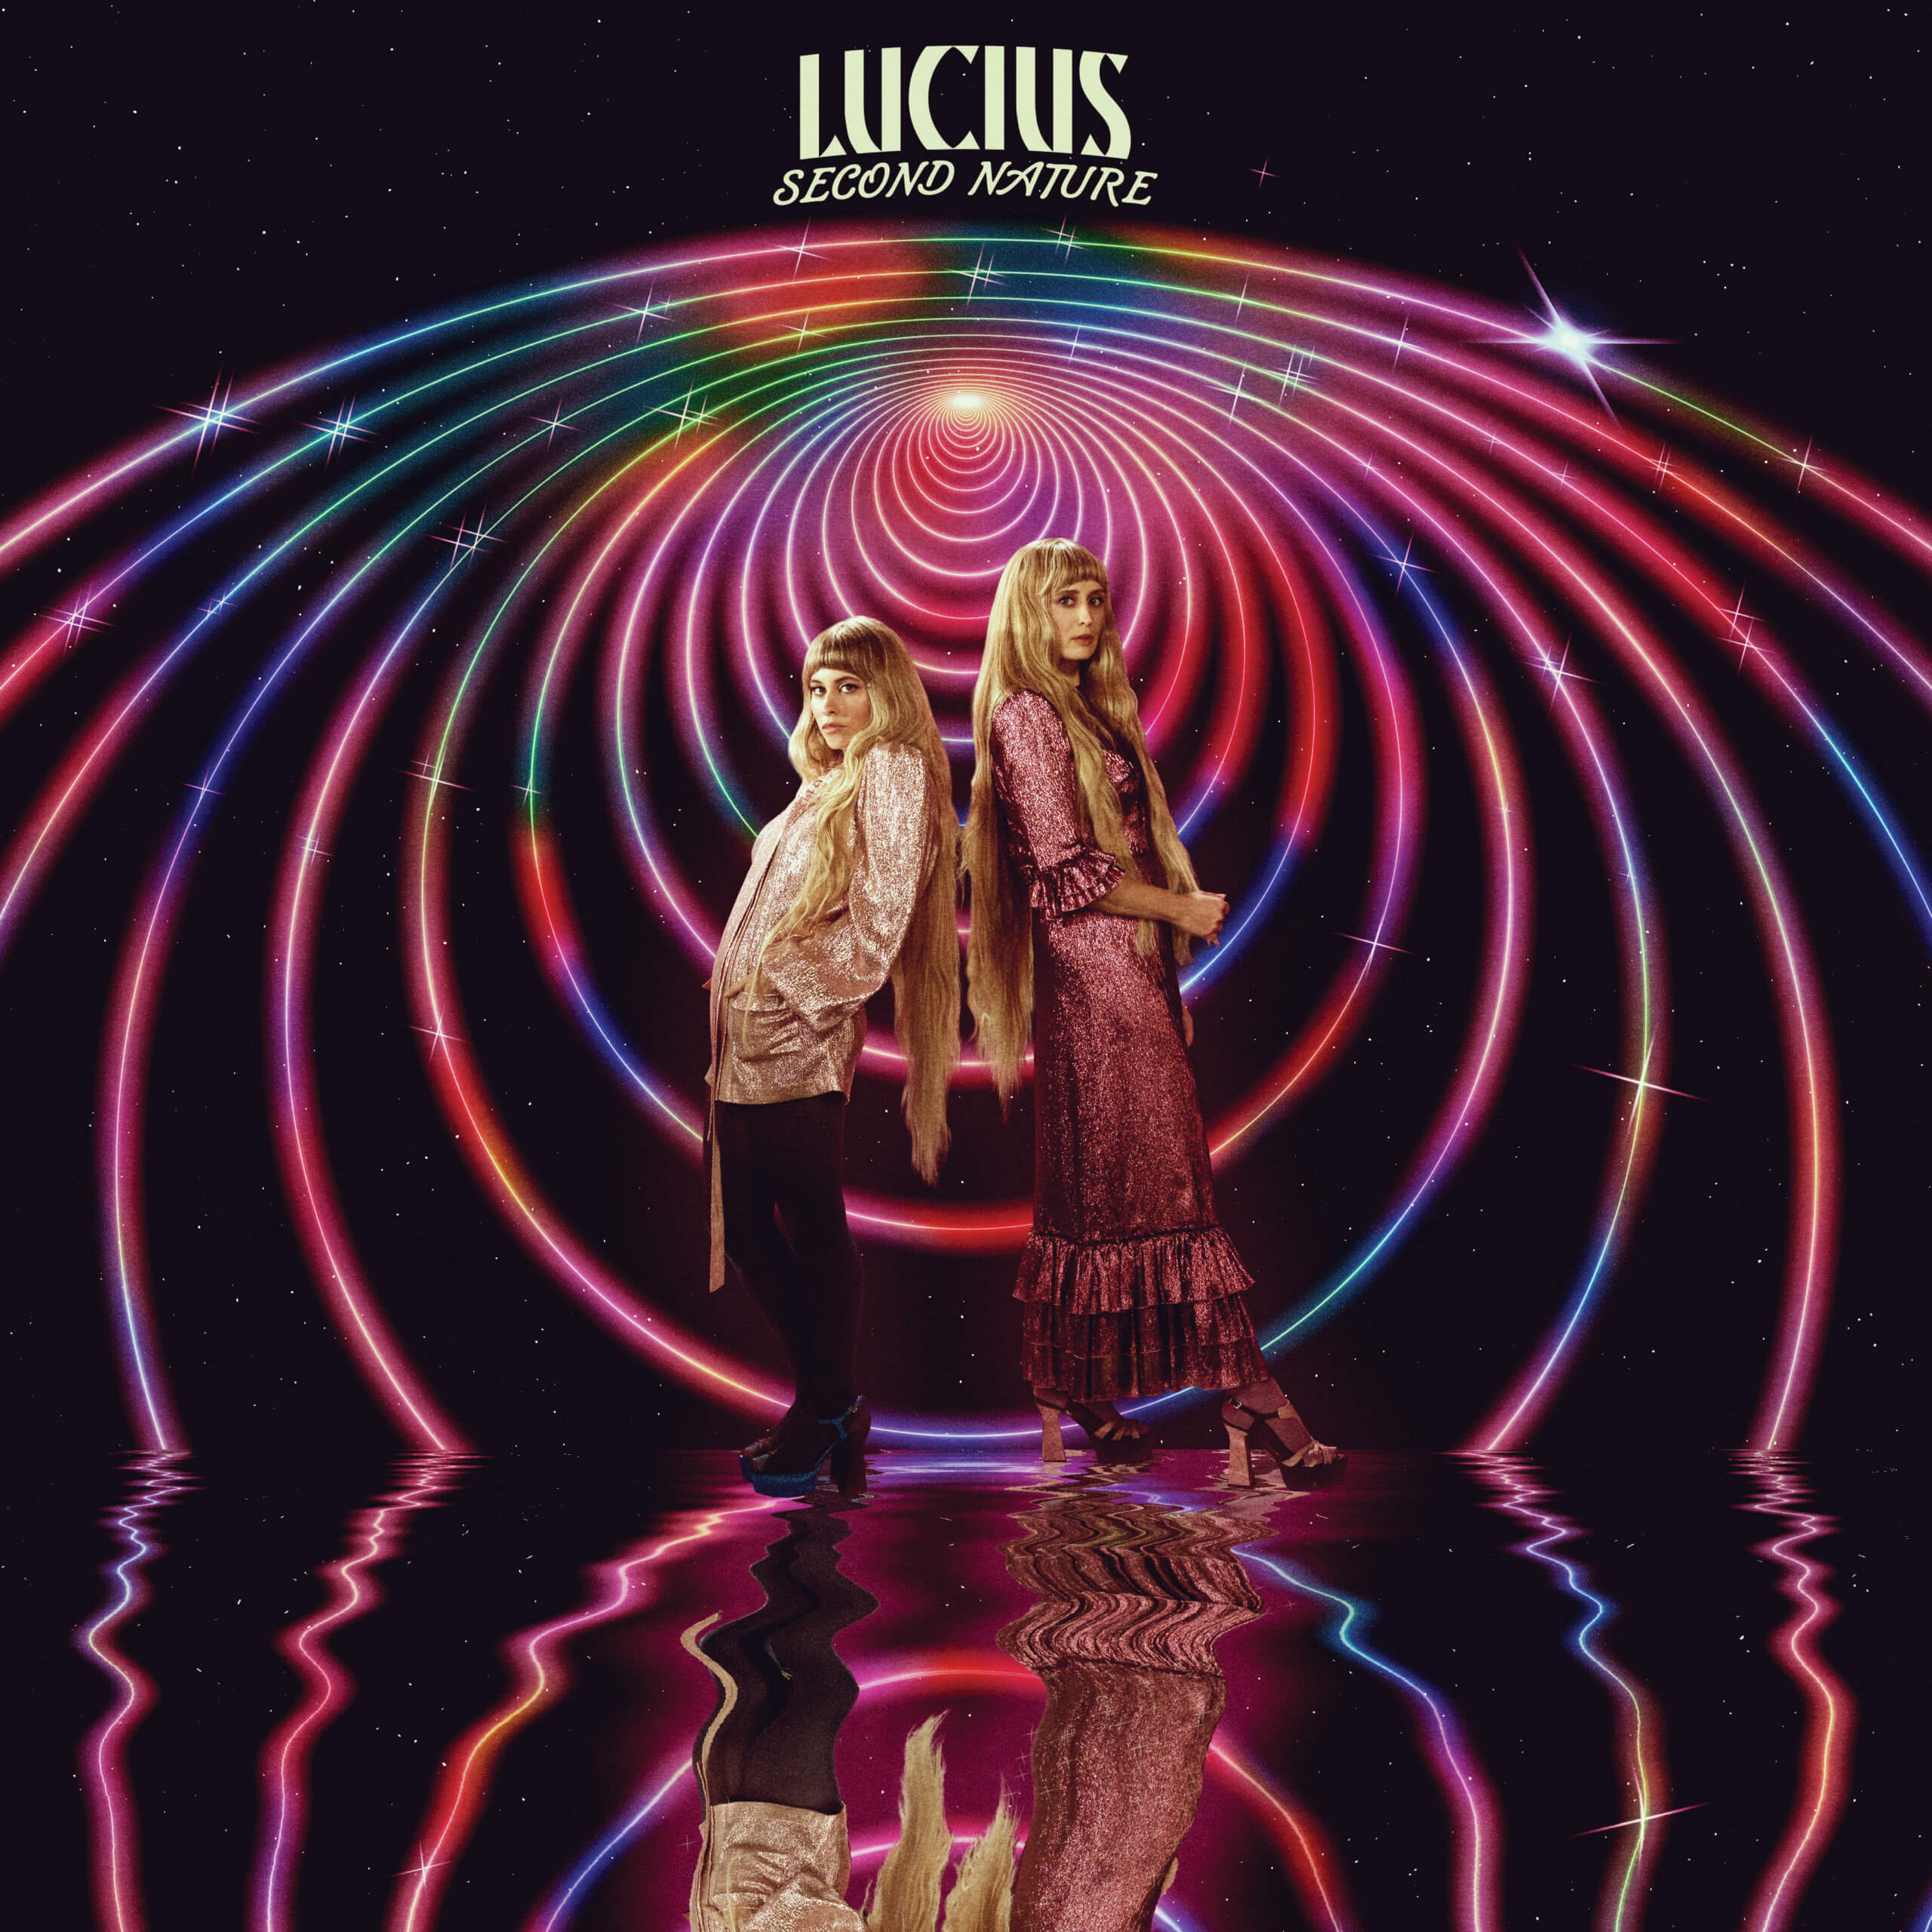 Second Nature by Lucius 'Album review by Stephan Boissonneault for Northern Transmissions